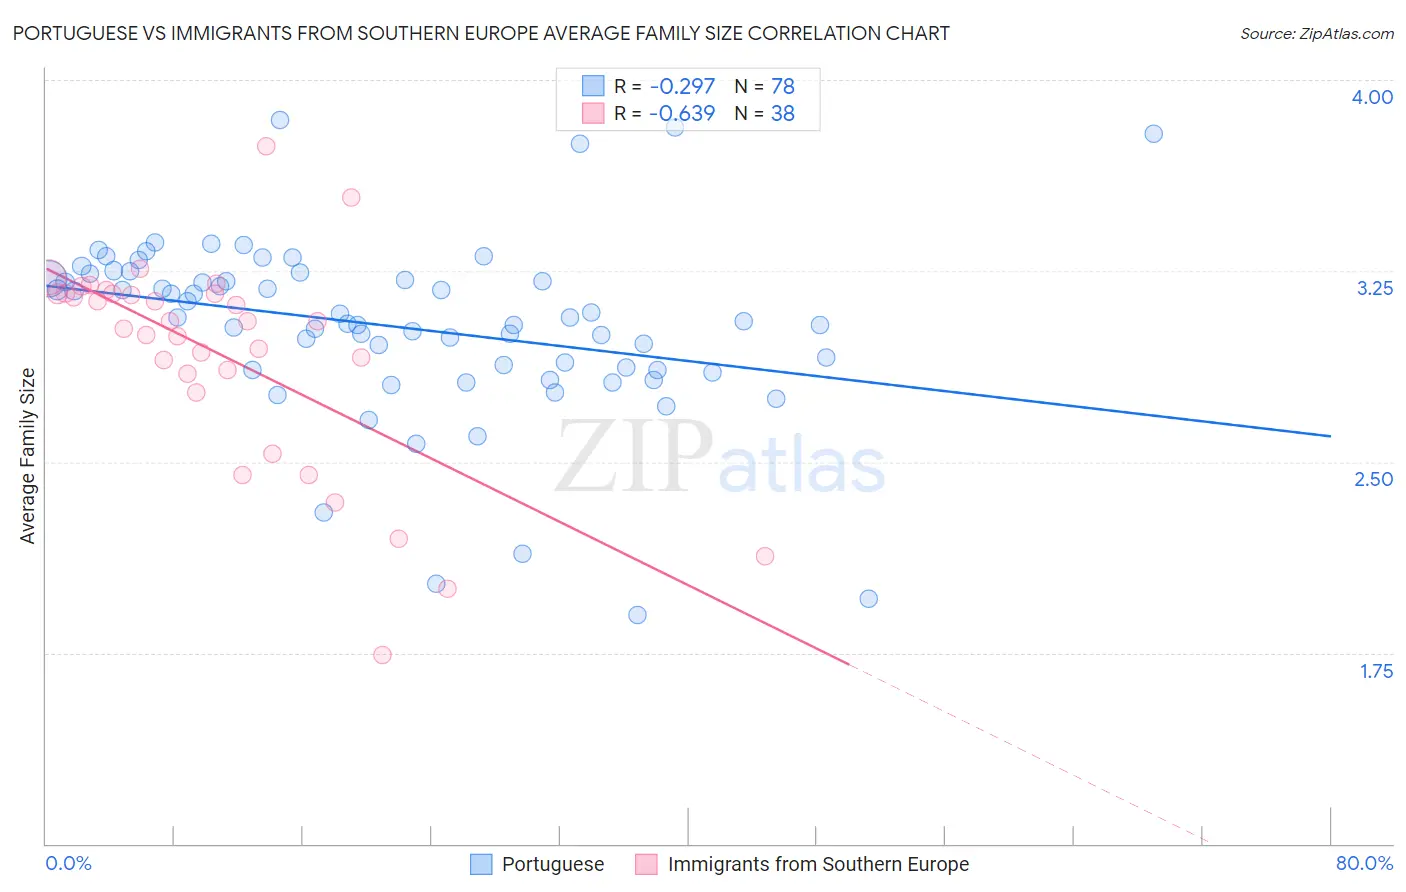 Portuguese vs Immigrants from Southern Europe Average Family Size